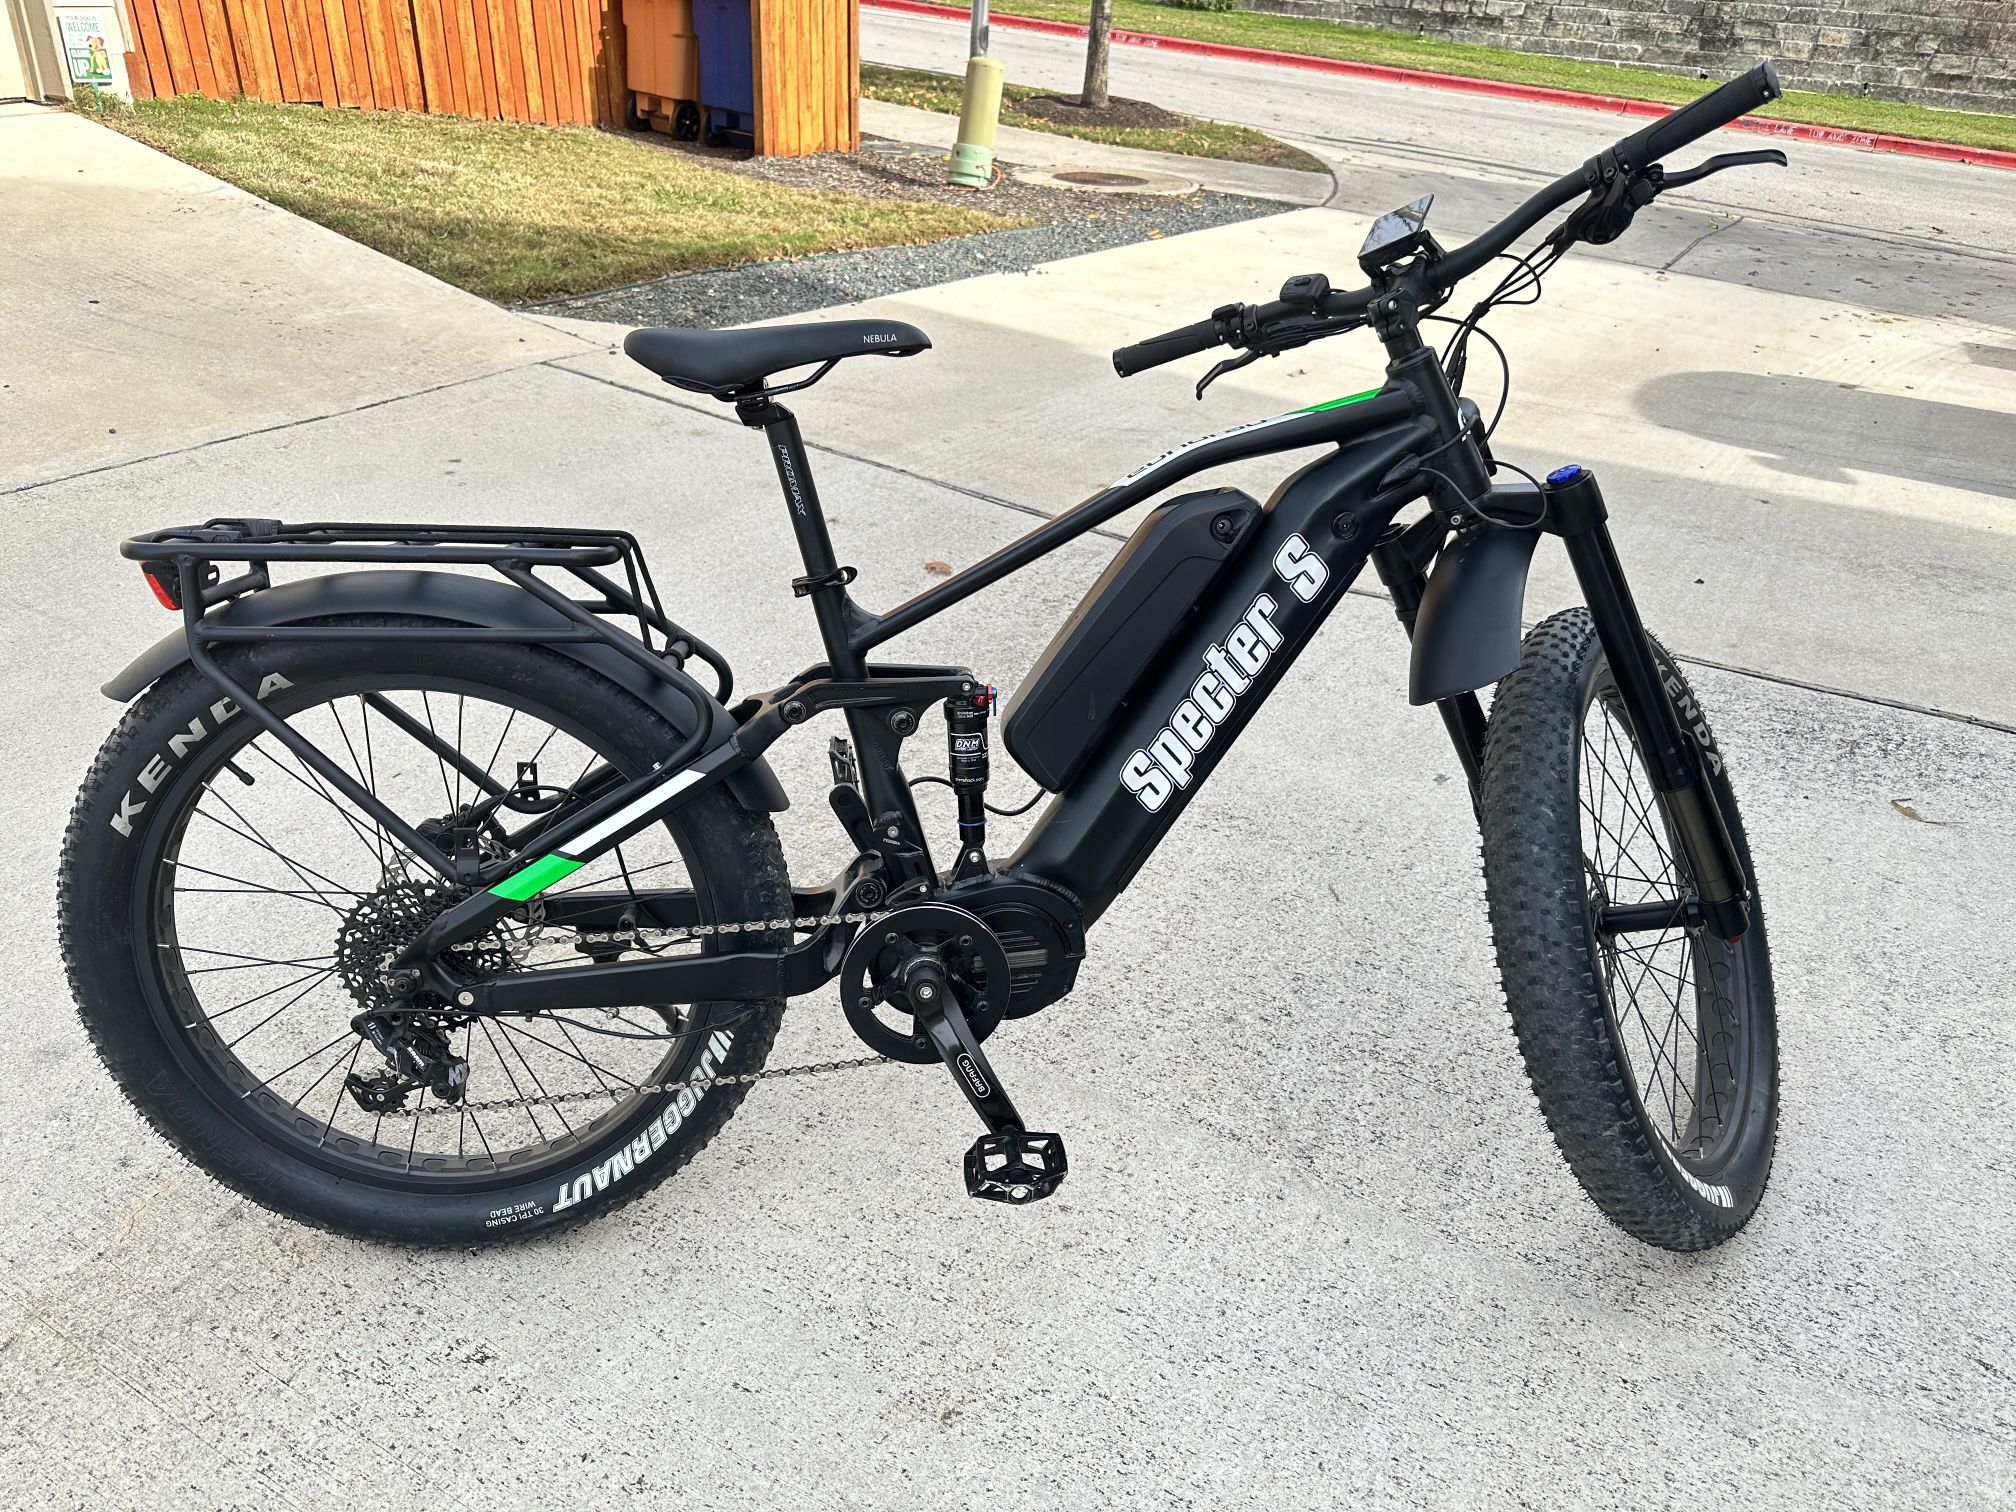 Eunorau Specter S Electric Bike with Trailer and Rack